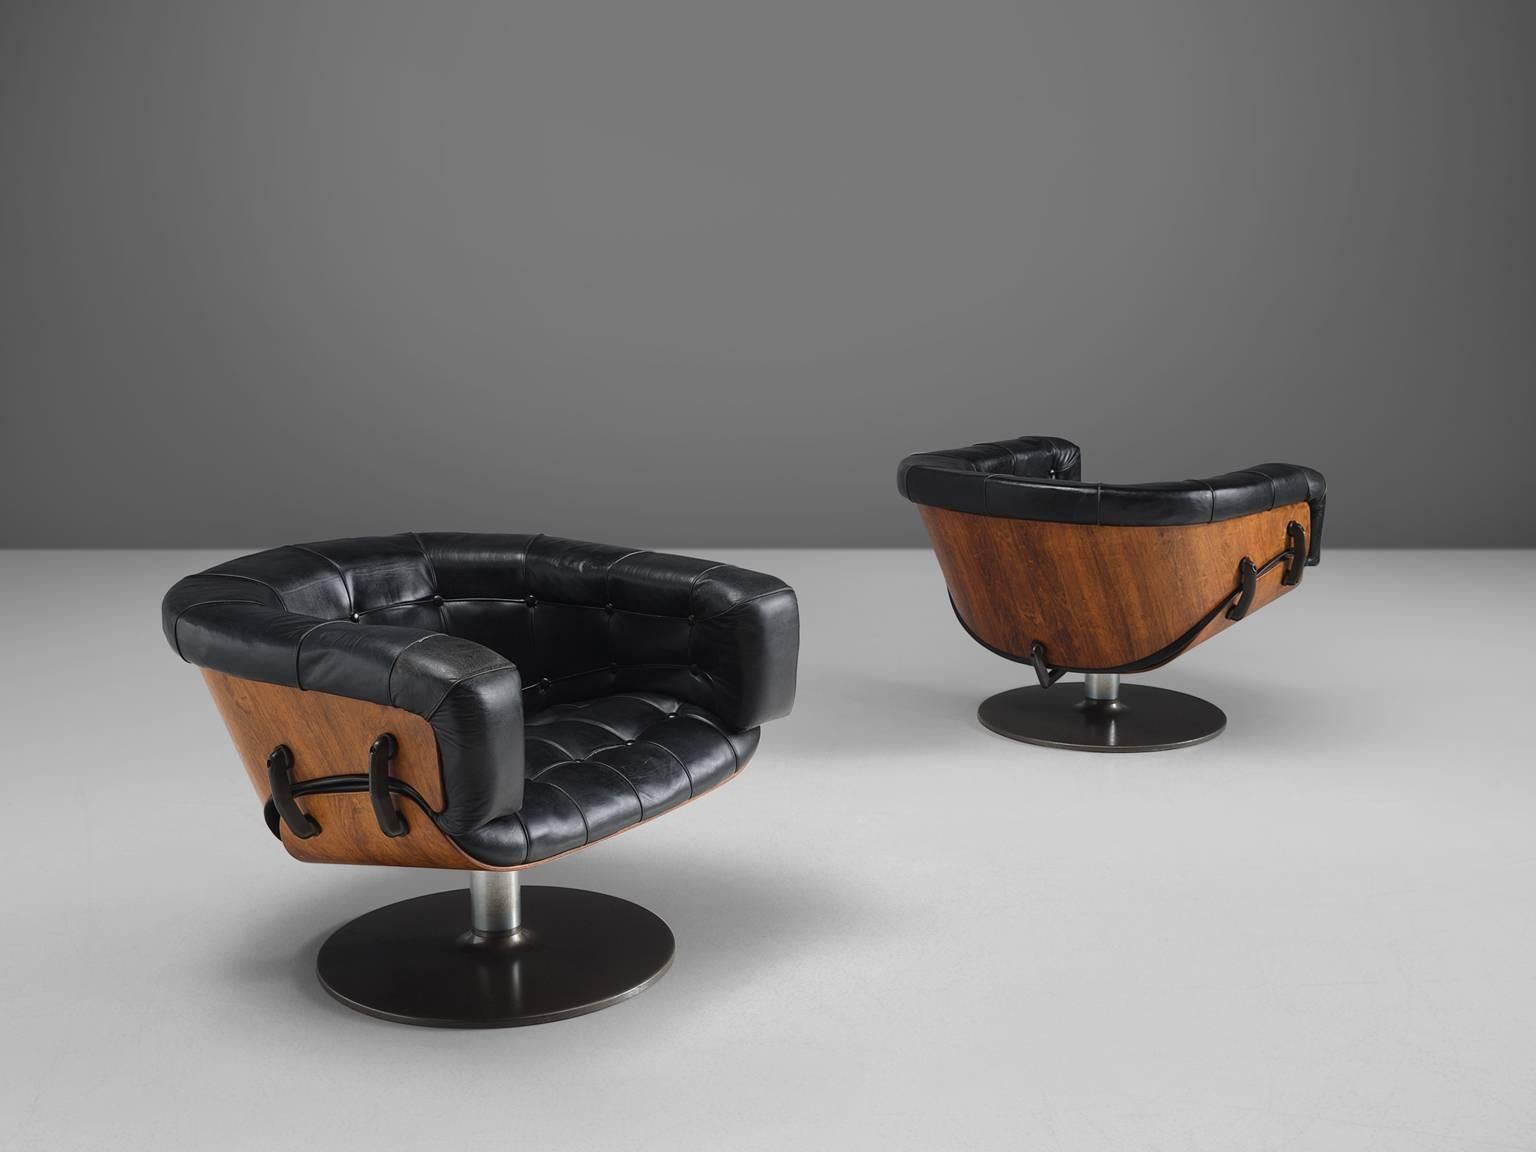 Martin Grierson for Arflex, armchairs, rosewood, leather, metal, 1960, Italy.

The design of this chair is both modernist and contemporary. The shell of this set of club chairs is constructed of two elements of rosewood that is connected via a